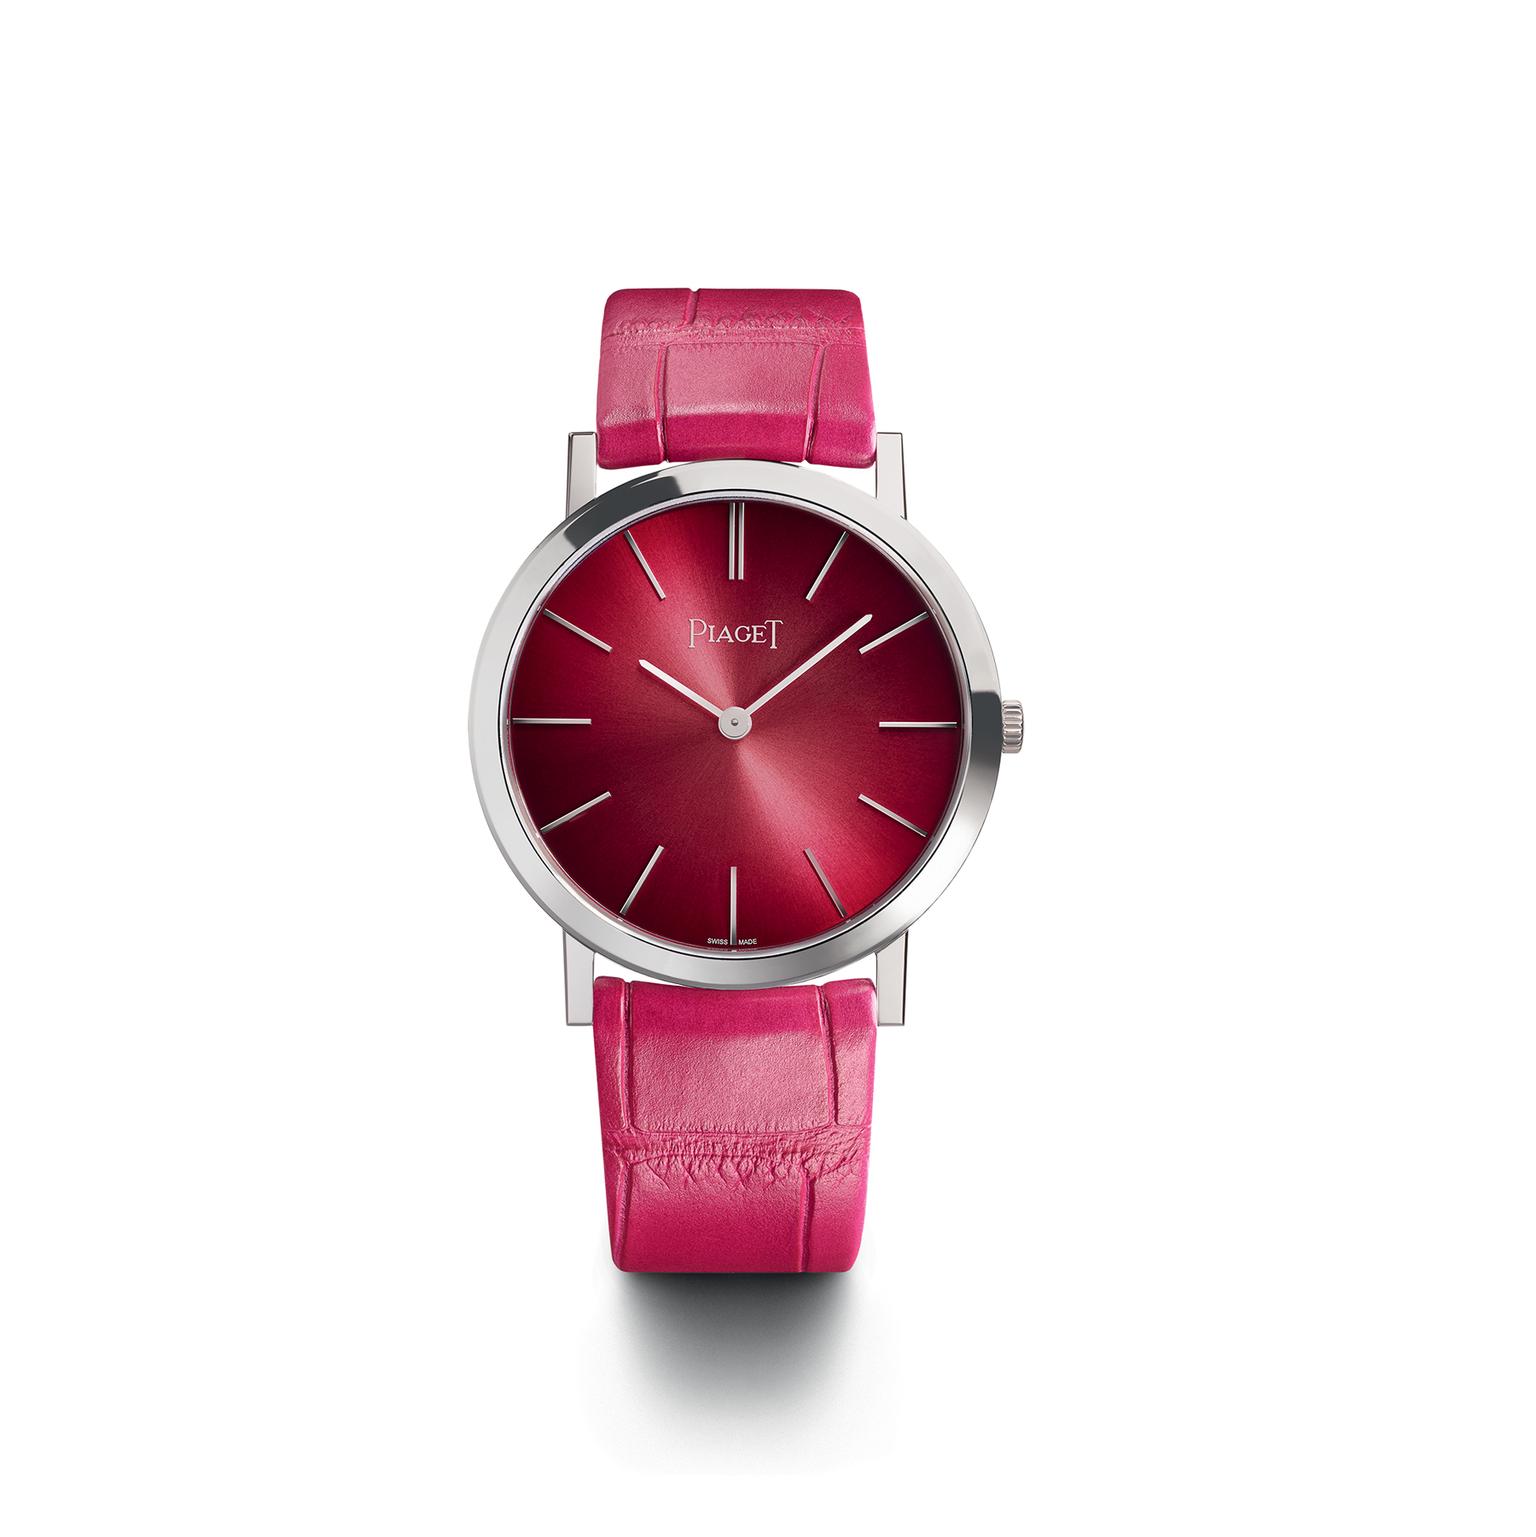 Piaget Altiplano watch in white gold with a pink dial